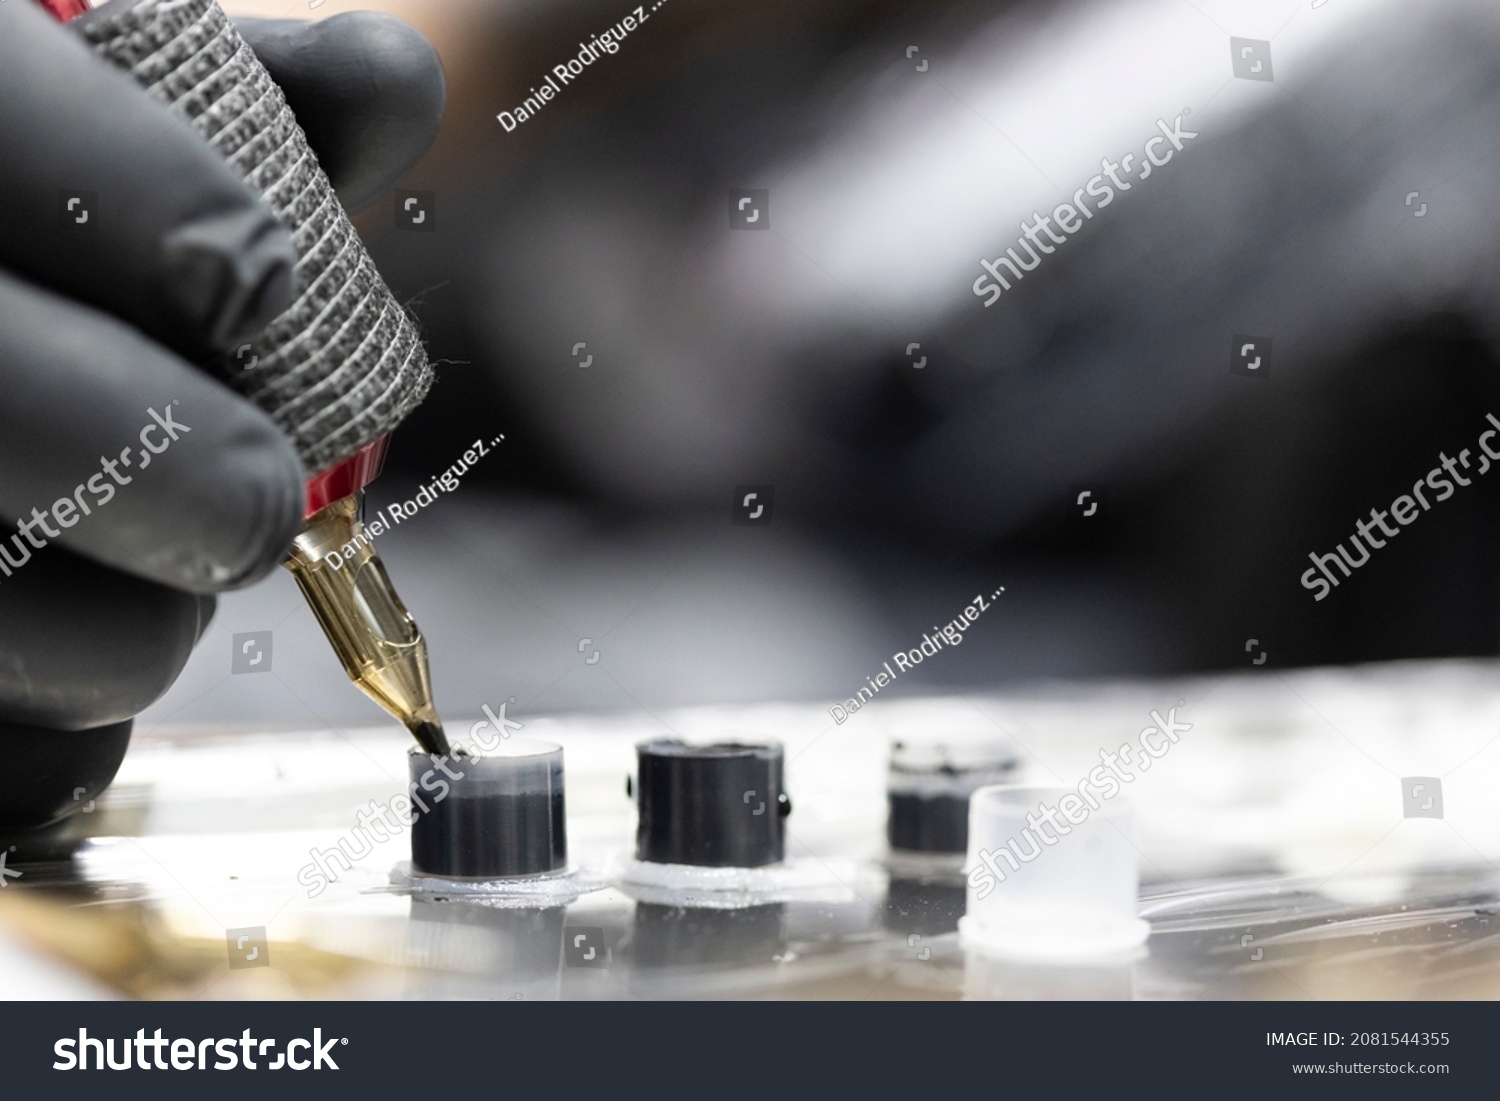 Detail of the tattooist's hand with black glove holding the tattoo machine while he loads ink into the needle while performing a tattoo. Image in horizontal and colour. #2081544355